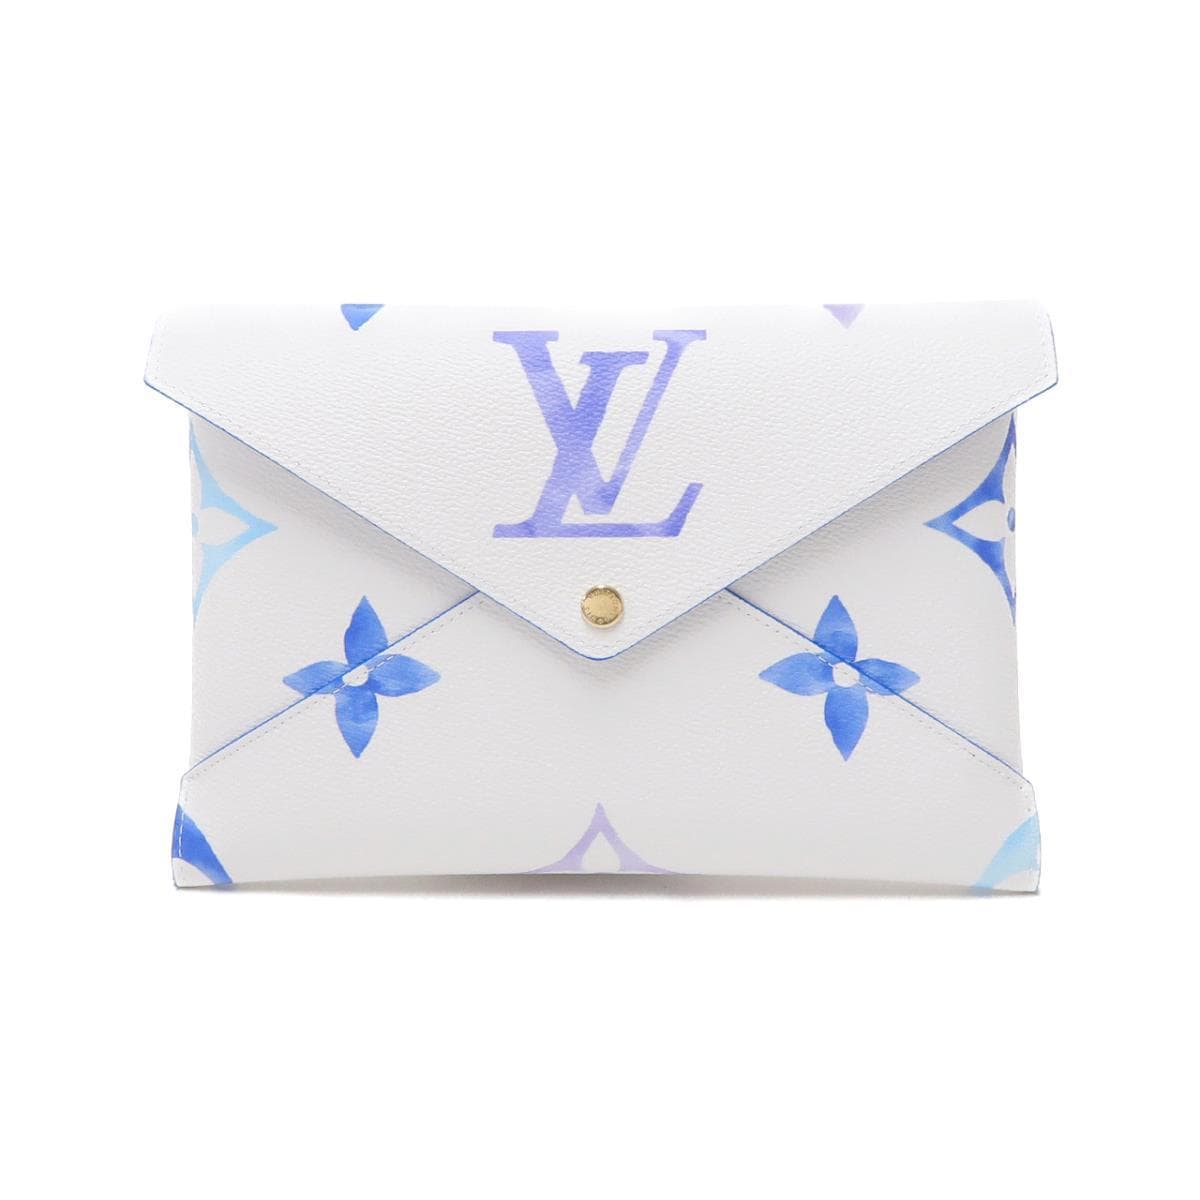 Louis Vuitton M82387 LV by The Pool Kirigami Pochette, Blue, One Size